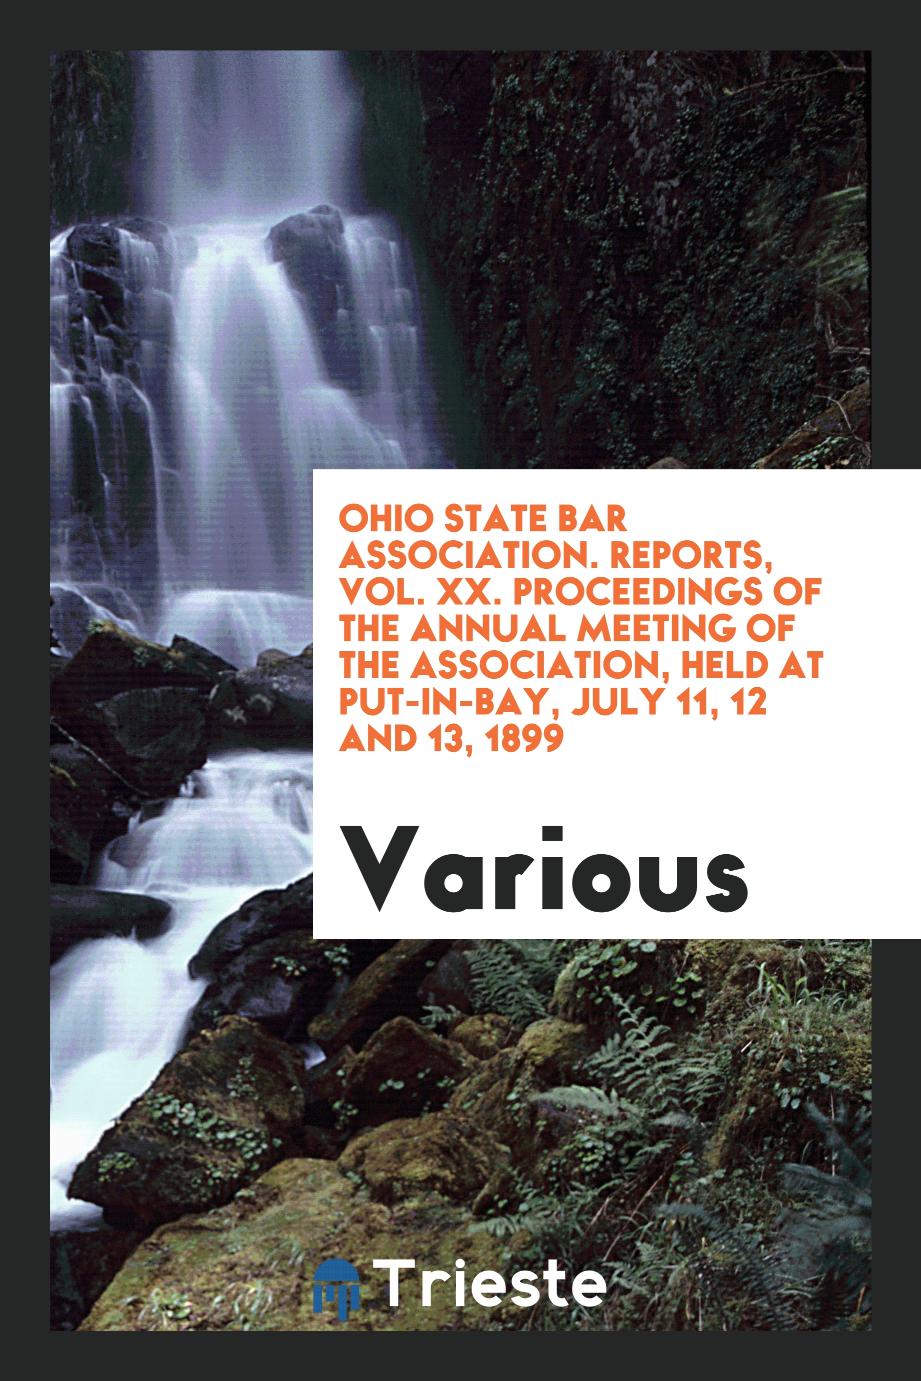 Ohio State Bar Association. Reports, Vol. XX. Proceedings of the Annual Meeting of the Association, Held at Put-in-Bay, July 11, 12 and 13, 1899